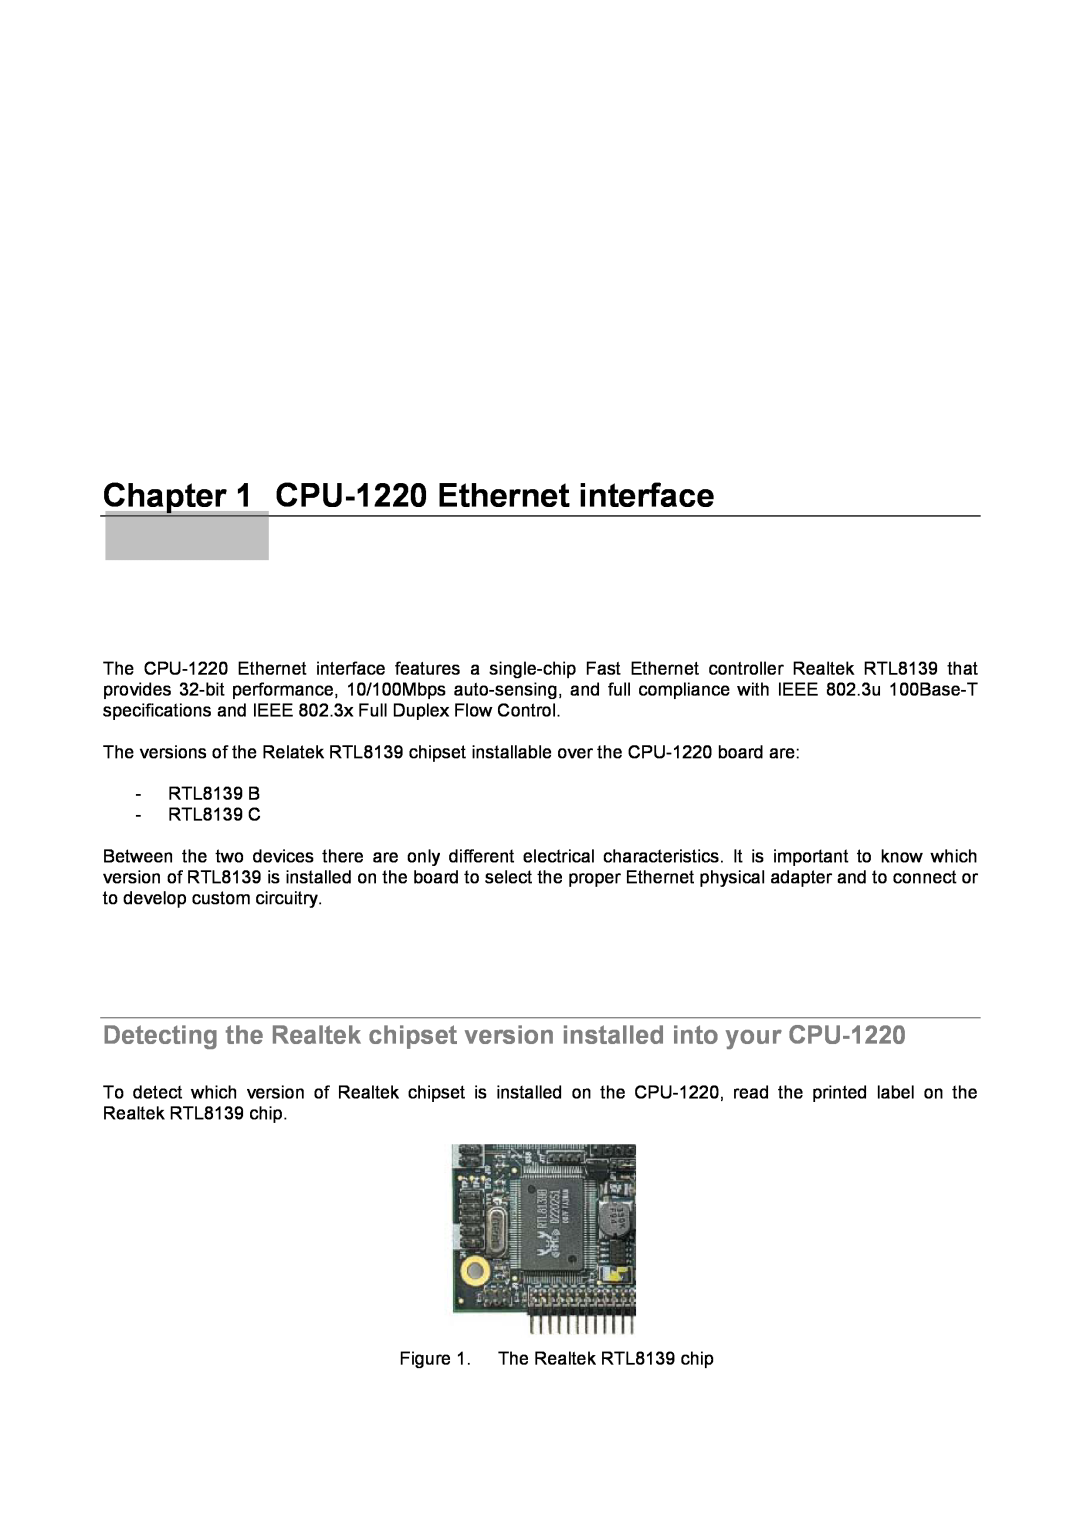 Eurotech Appliances An0038 CPU-1220 Ethernet interface, Detecting the Realtek chipset version installed into your CPU-1220 